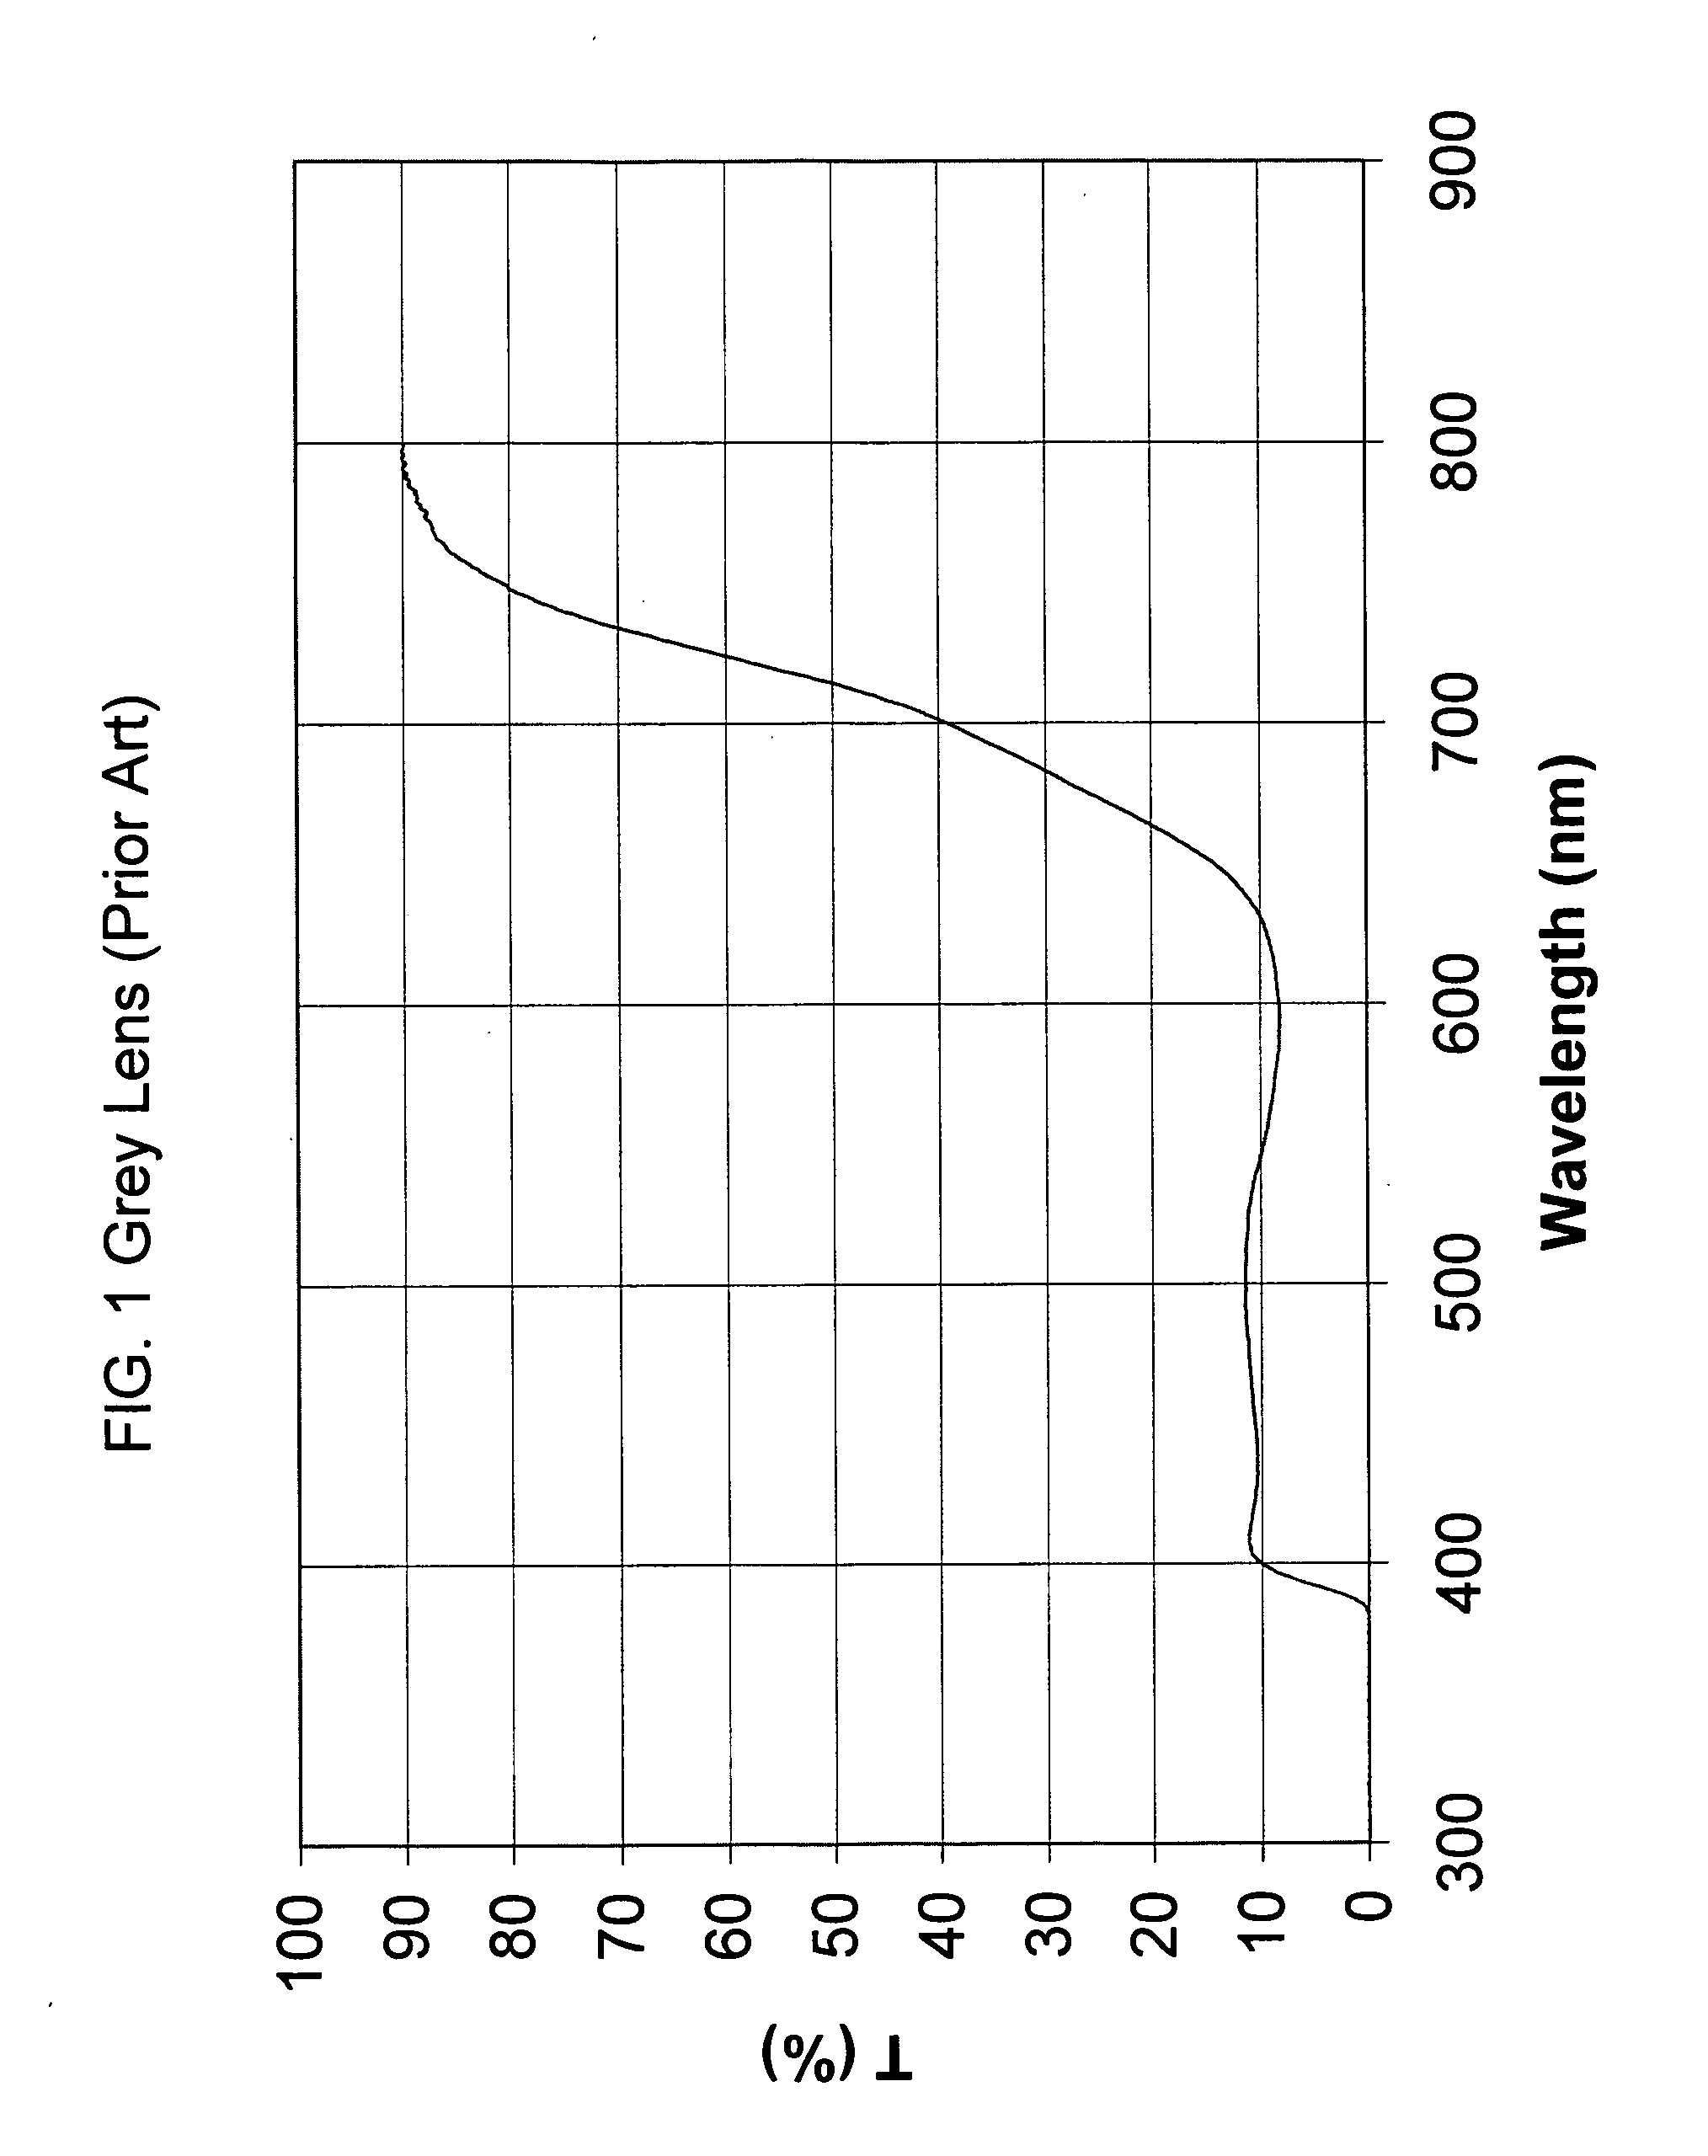 Polarized optical elements enhancing color contrast and methods for their manufacture